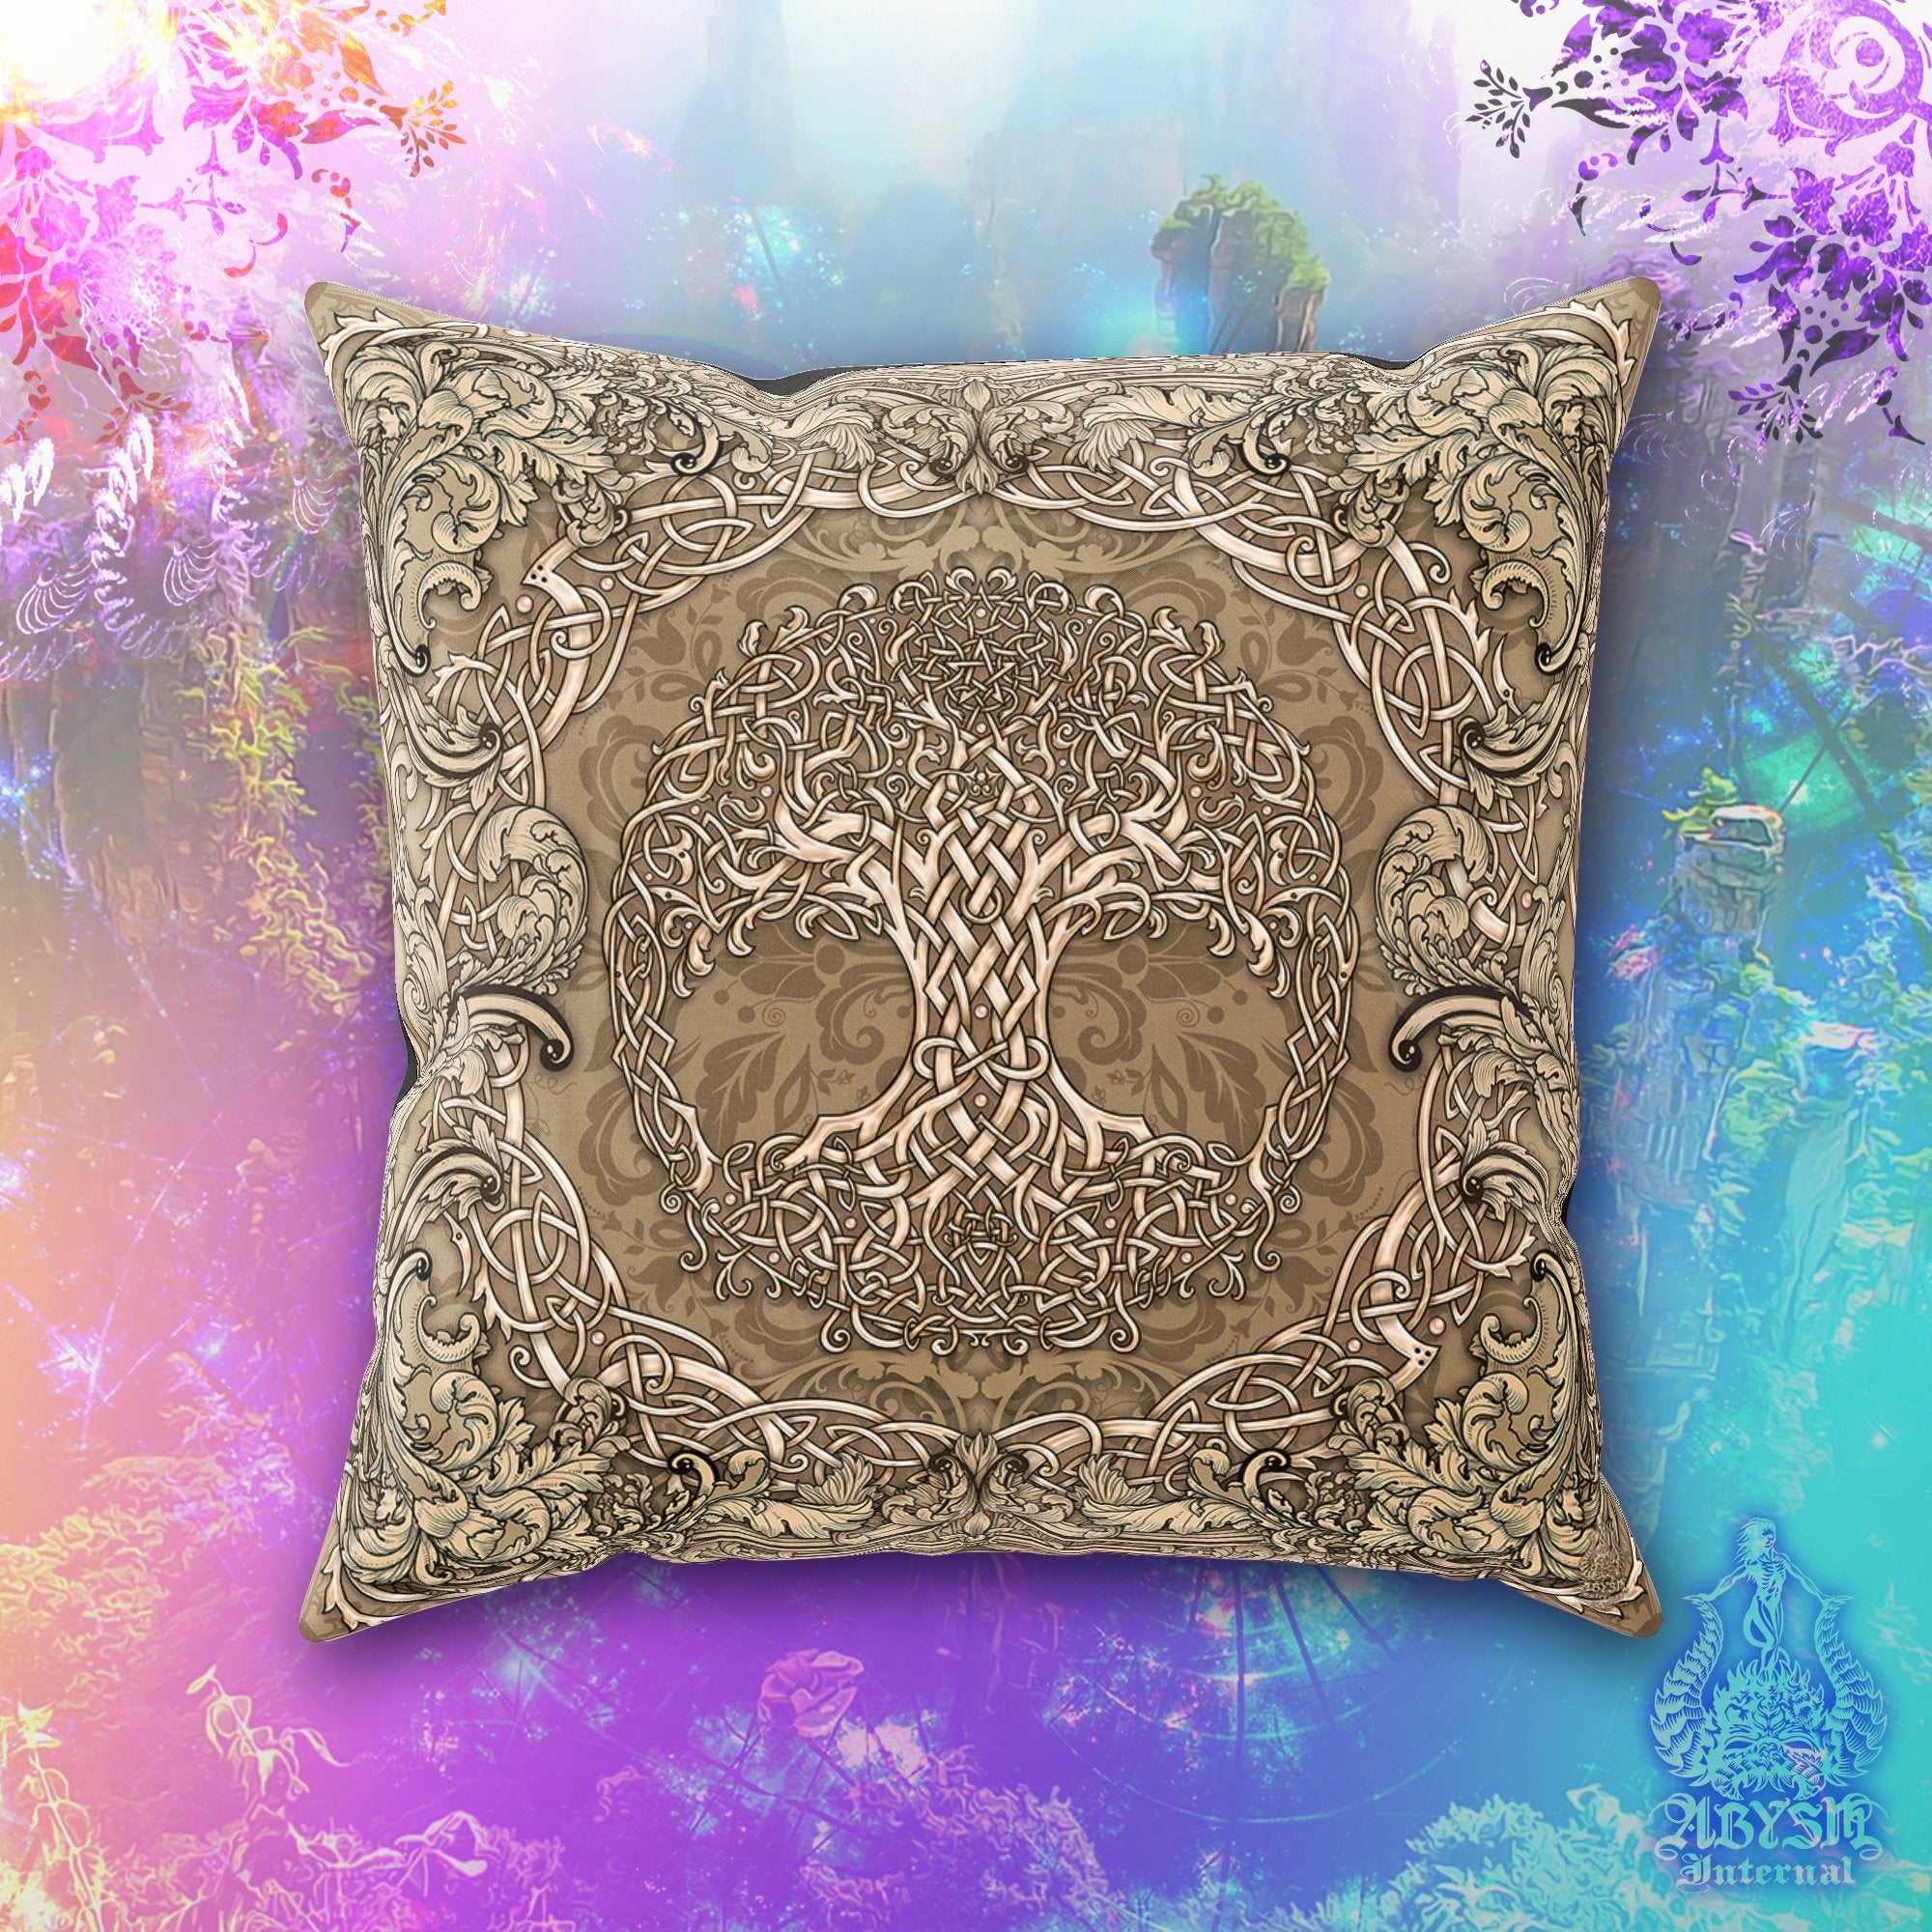 Tree of Life Throw Pillow, Decorative Accent Cushion, Wicca, Pagan Decor, Witchy Art, Celtic Knot, Funky and Eclectic Home - Cream - Abysm Internal